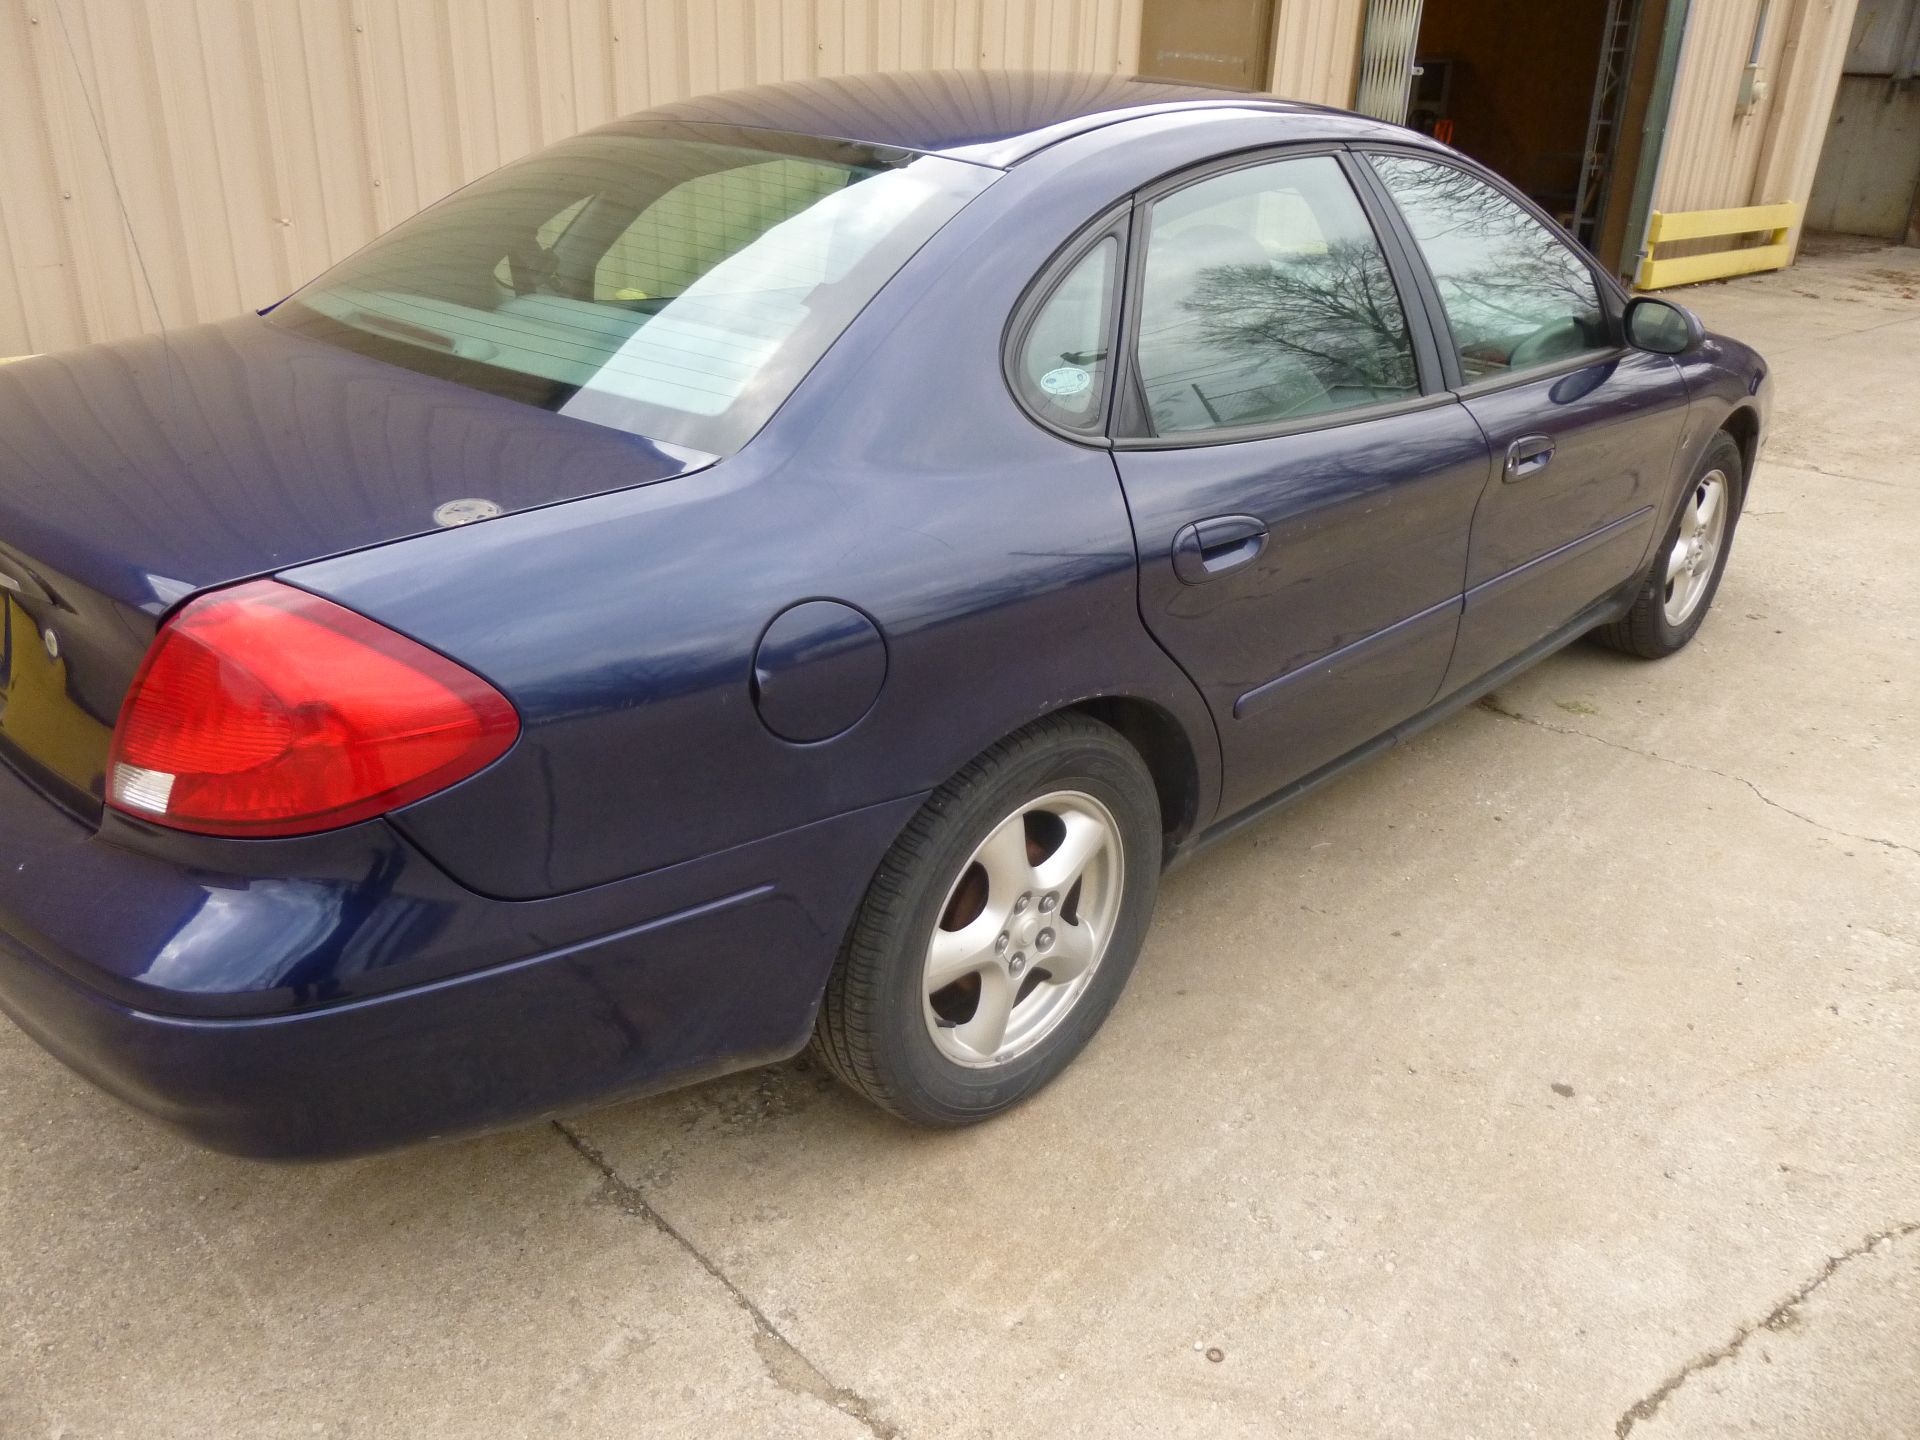 2002 Ford Taurus Municipally maintained Miles 92930 Vin # 1FAFP532X2G180779 CLEAR TITLE(located at - Image 9 of 12